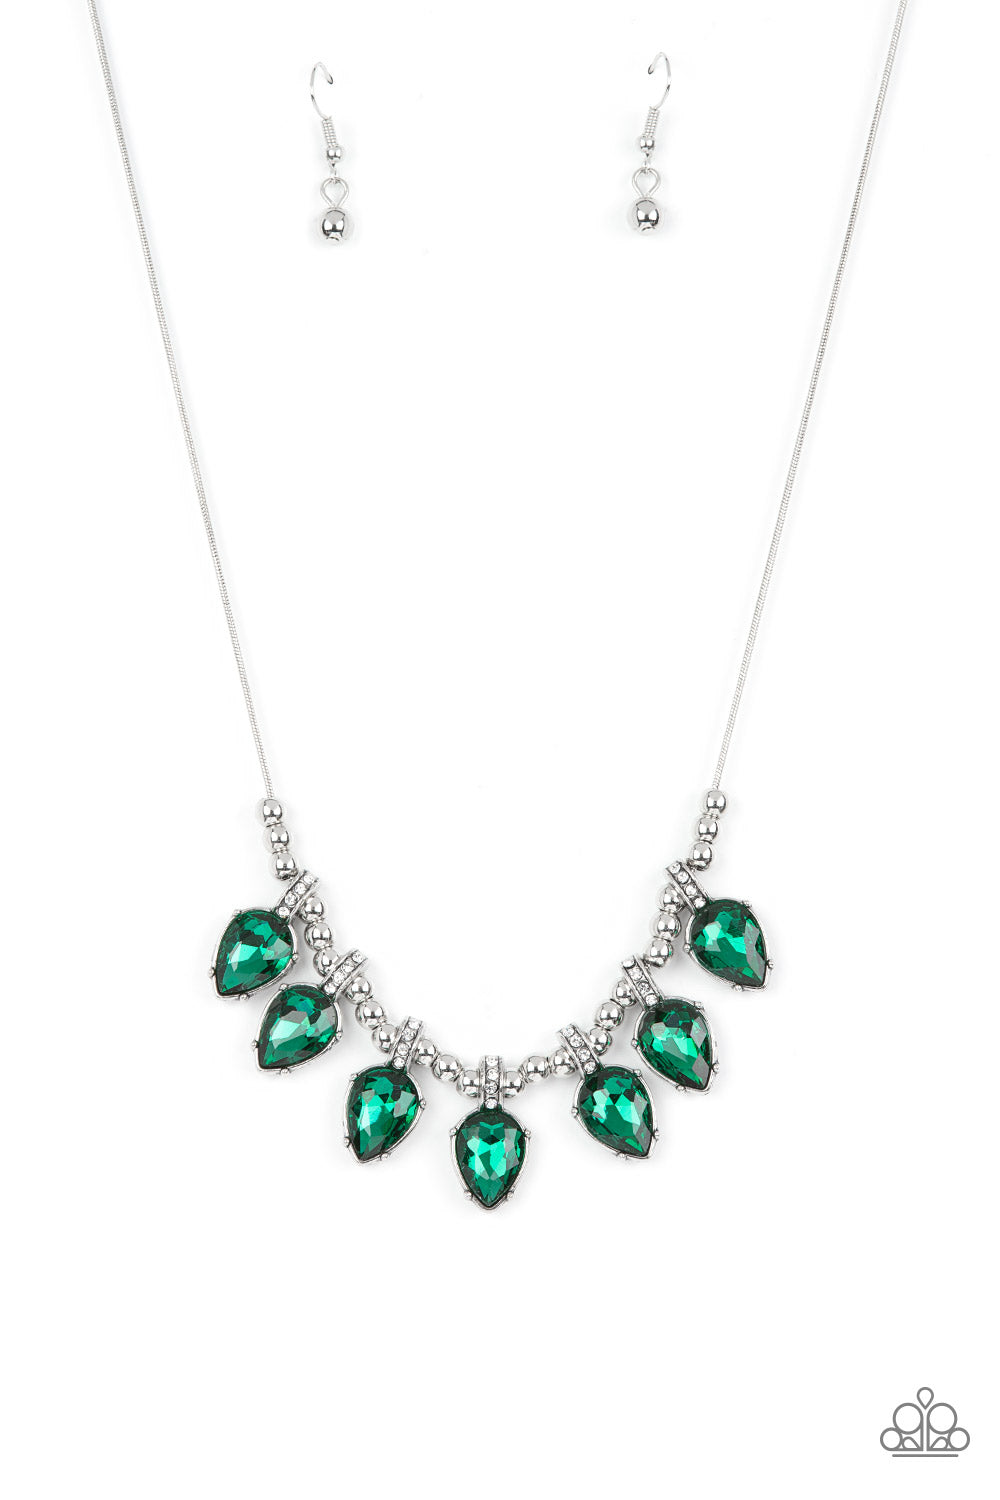 crown-jewel-couture-green-p2re-grxx-239xx